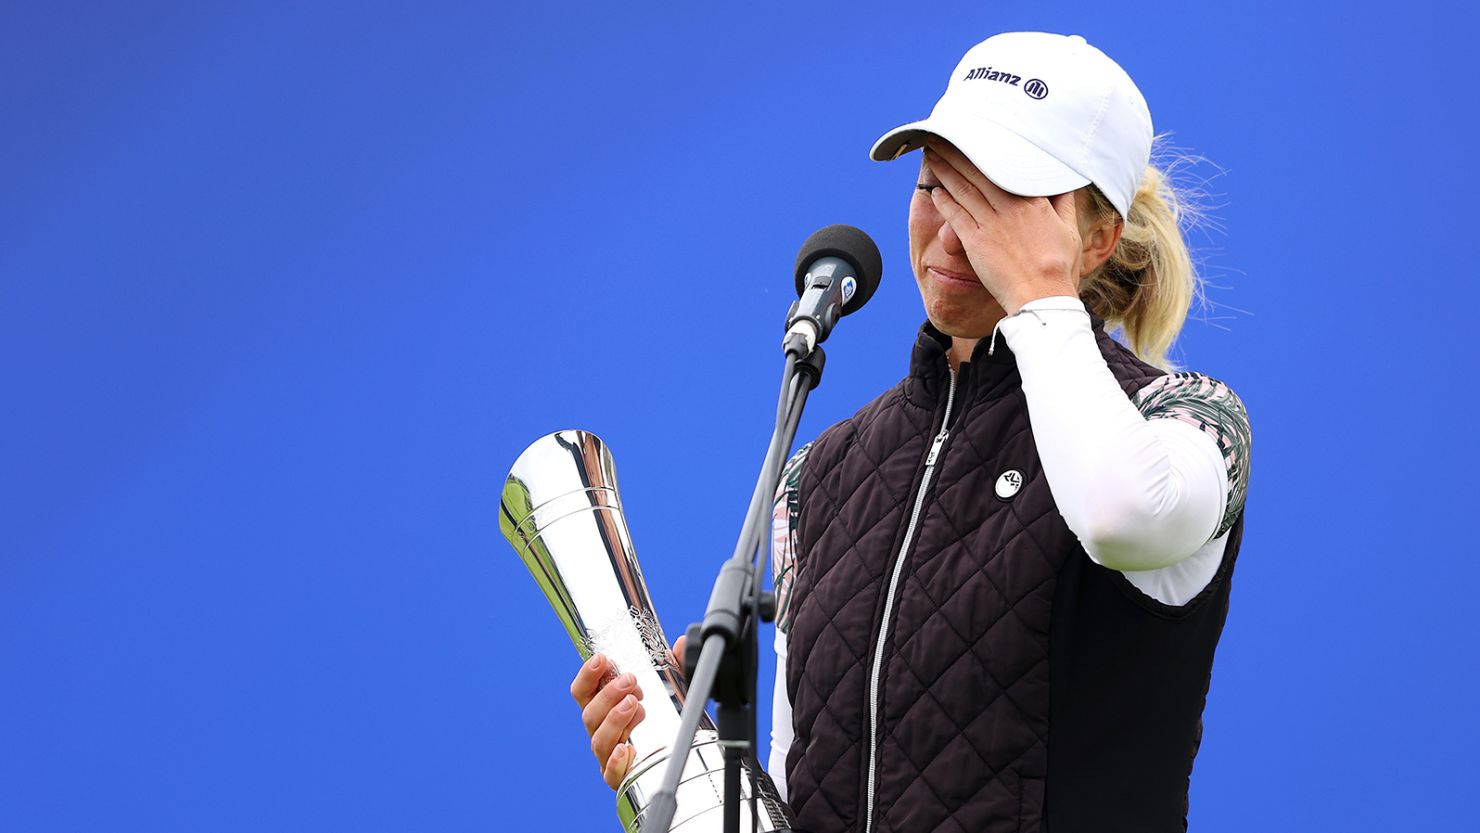 Sophia Popov of Germany cries with happiness after winning the 2020 British Open in Troon, Scotland, on Sunday, August 23.